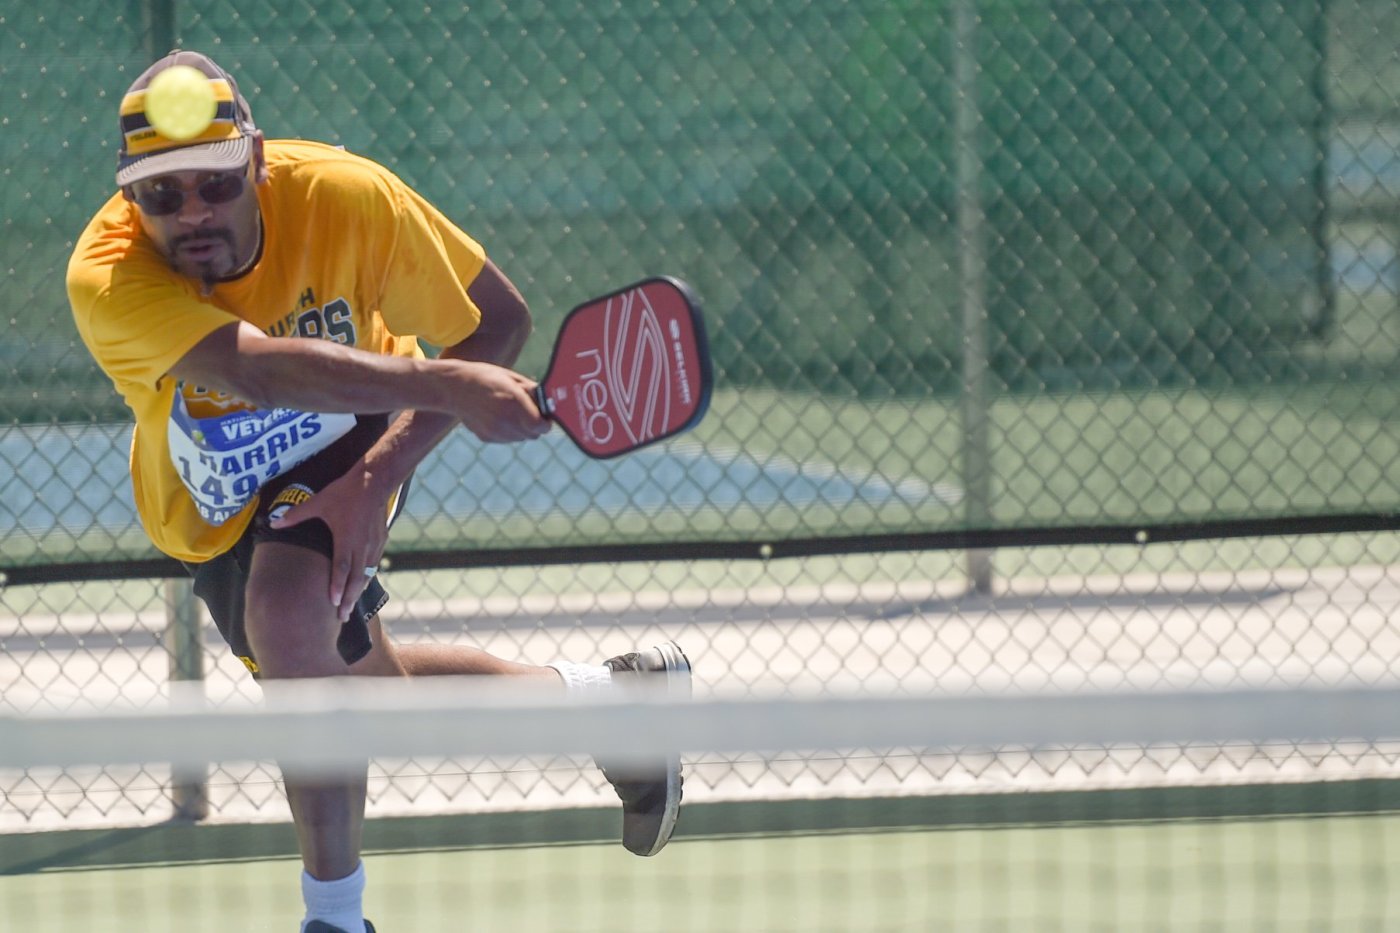 A veteran competes in pickle ball at the National Veterans Golden Age Games.